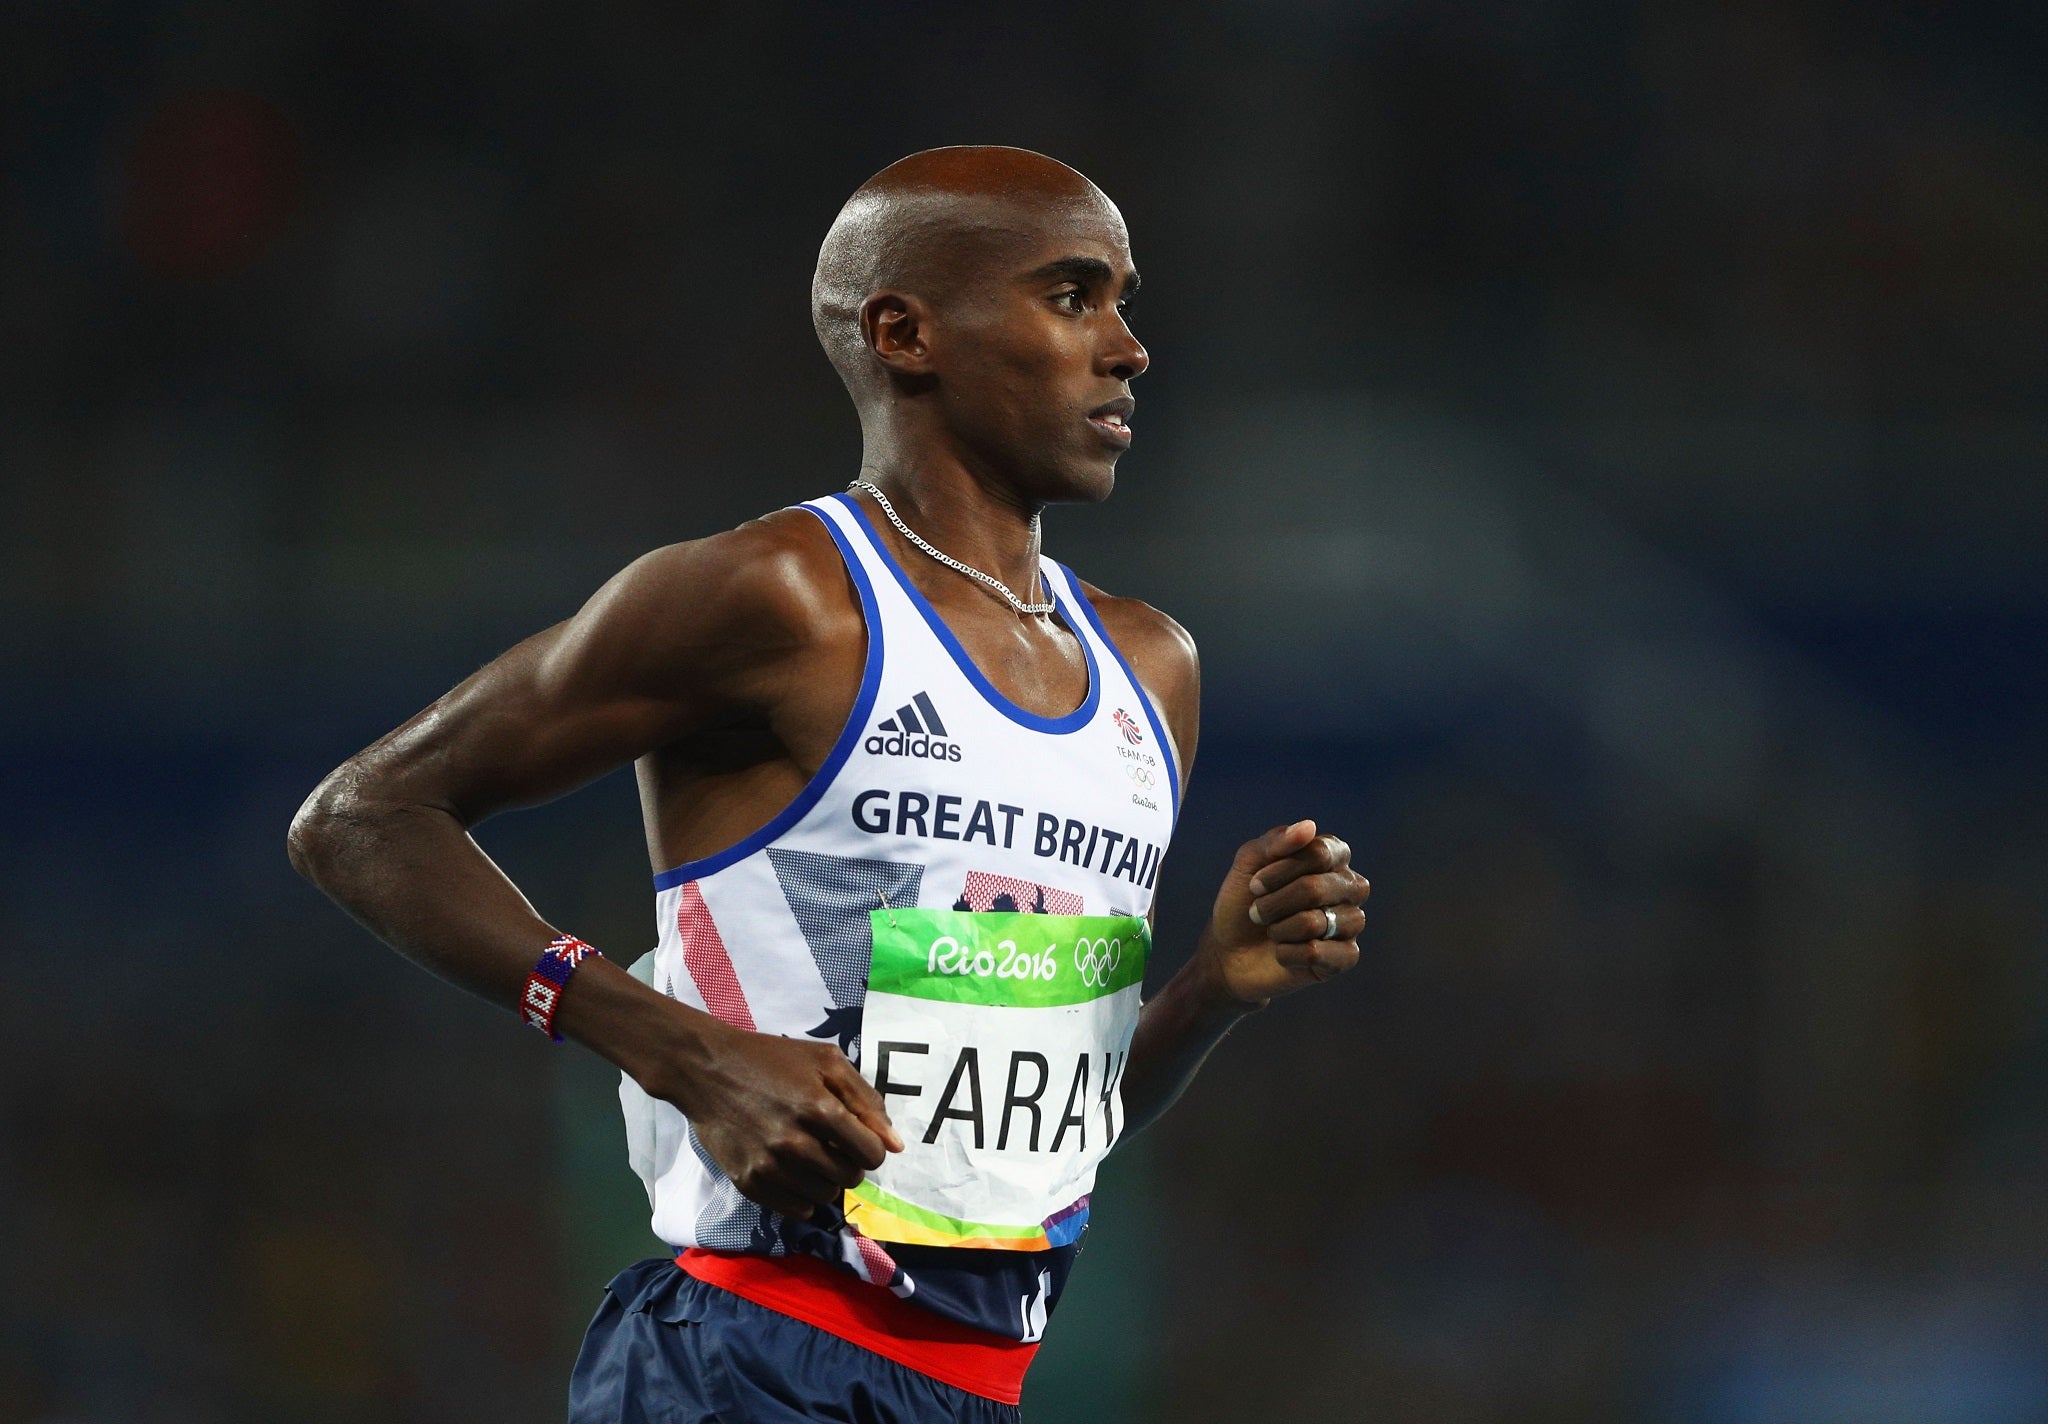 Mo Farah was tripped midway through the 10,000m final